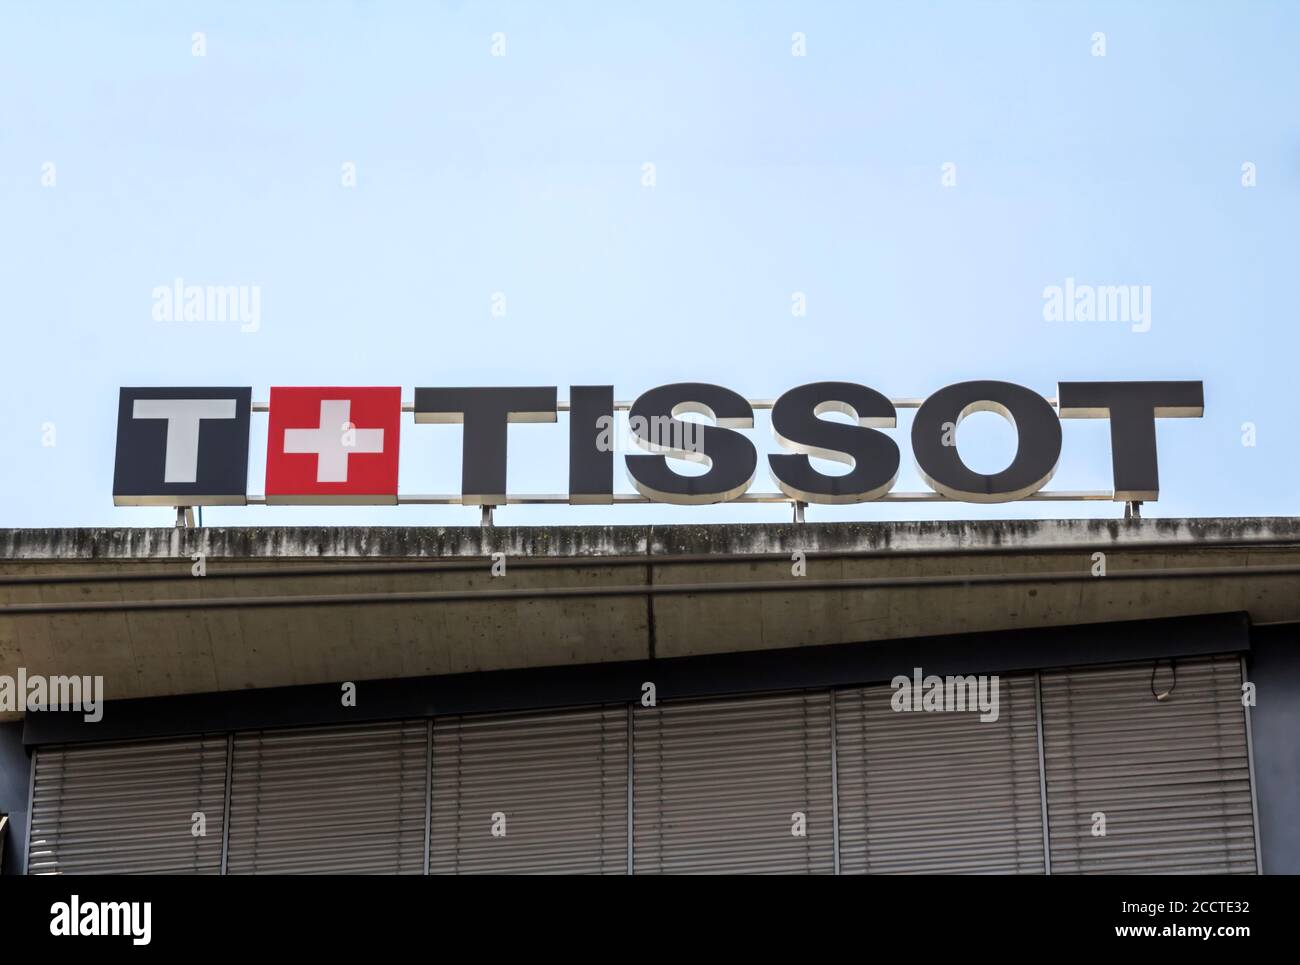 Basel, SWITZERLAND - July 1, 2019: Tissot logo on their jewelry boutique in Basel. Tissot is a Swiss luxury watchmaker famous for chronographs and wat Stock Photo